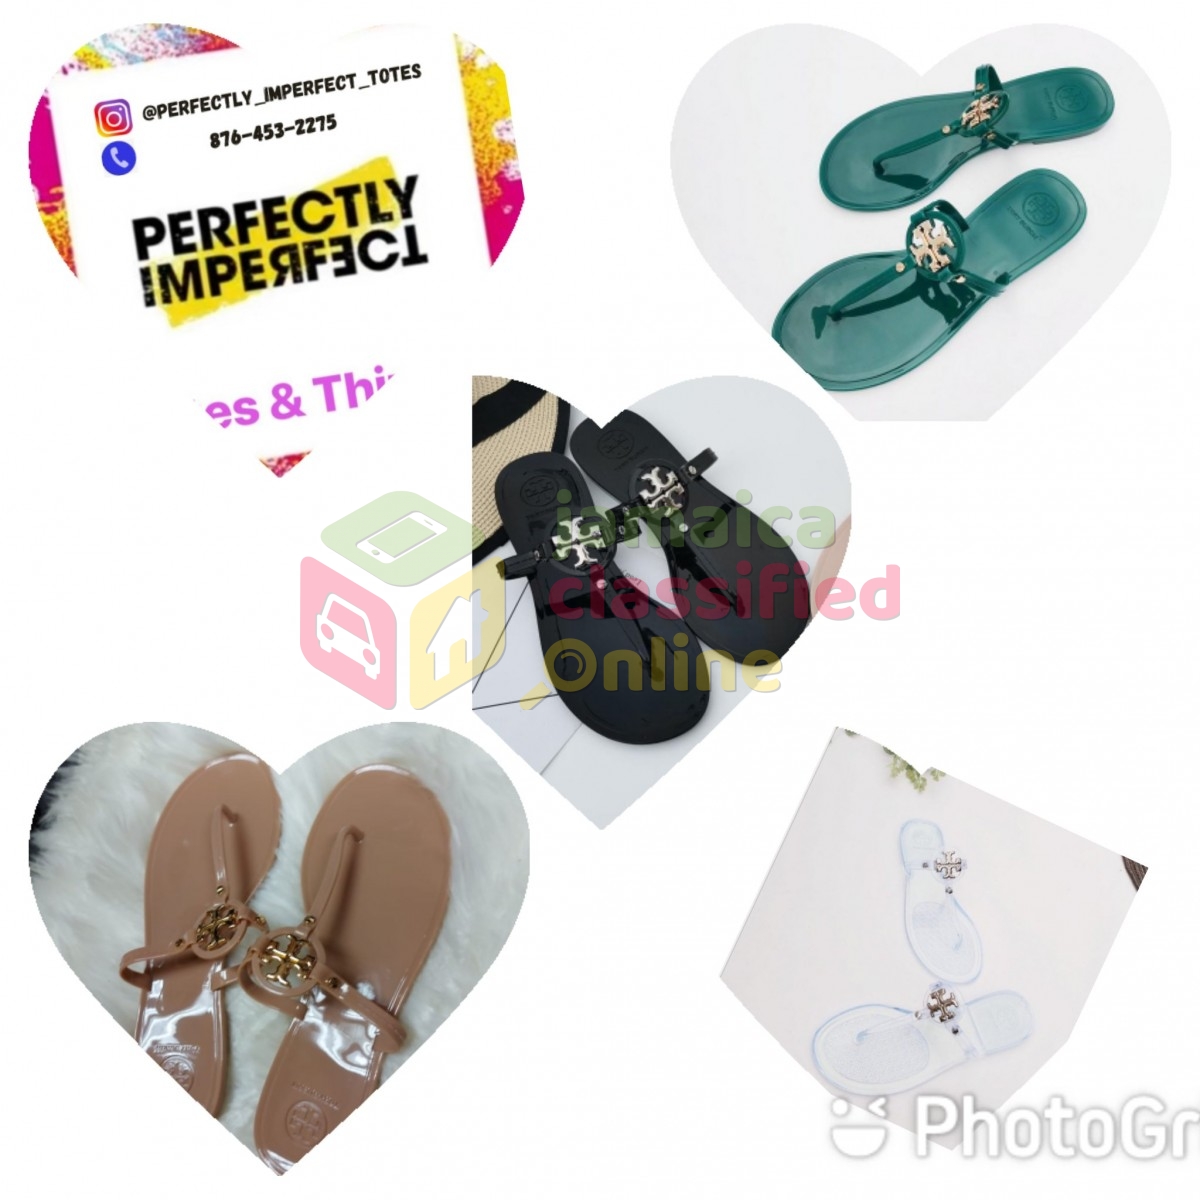 For Sale: Inspired Tory Burch Sandals - Montego Bay